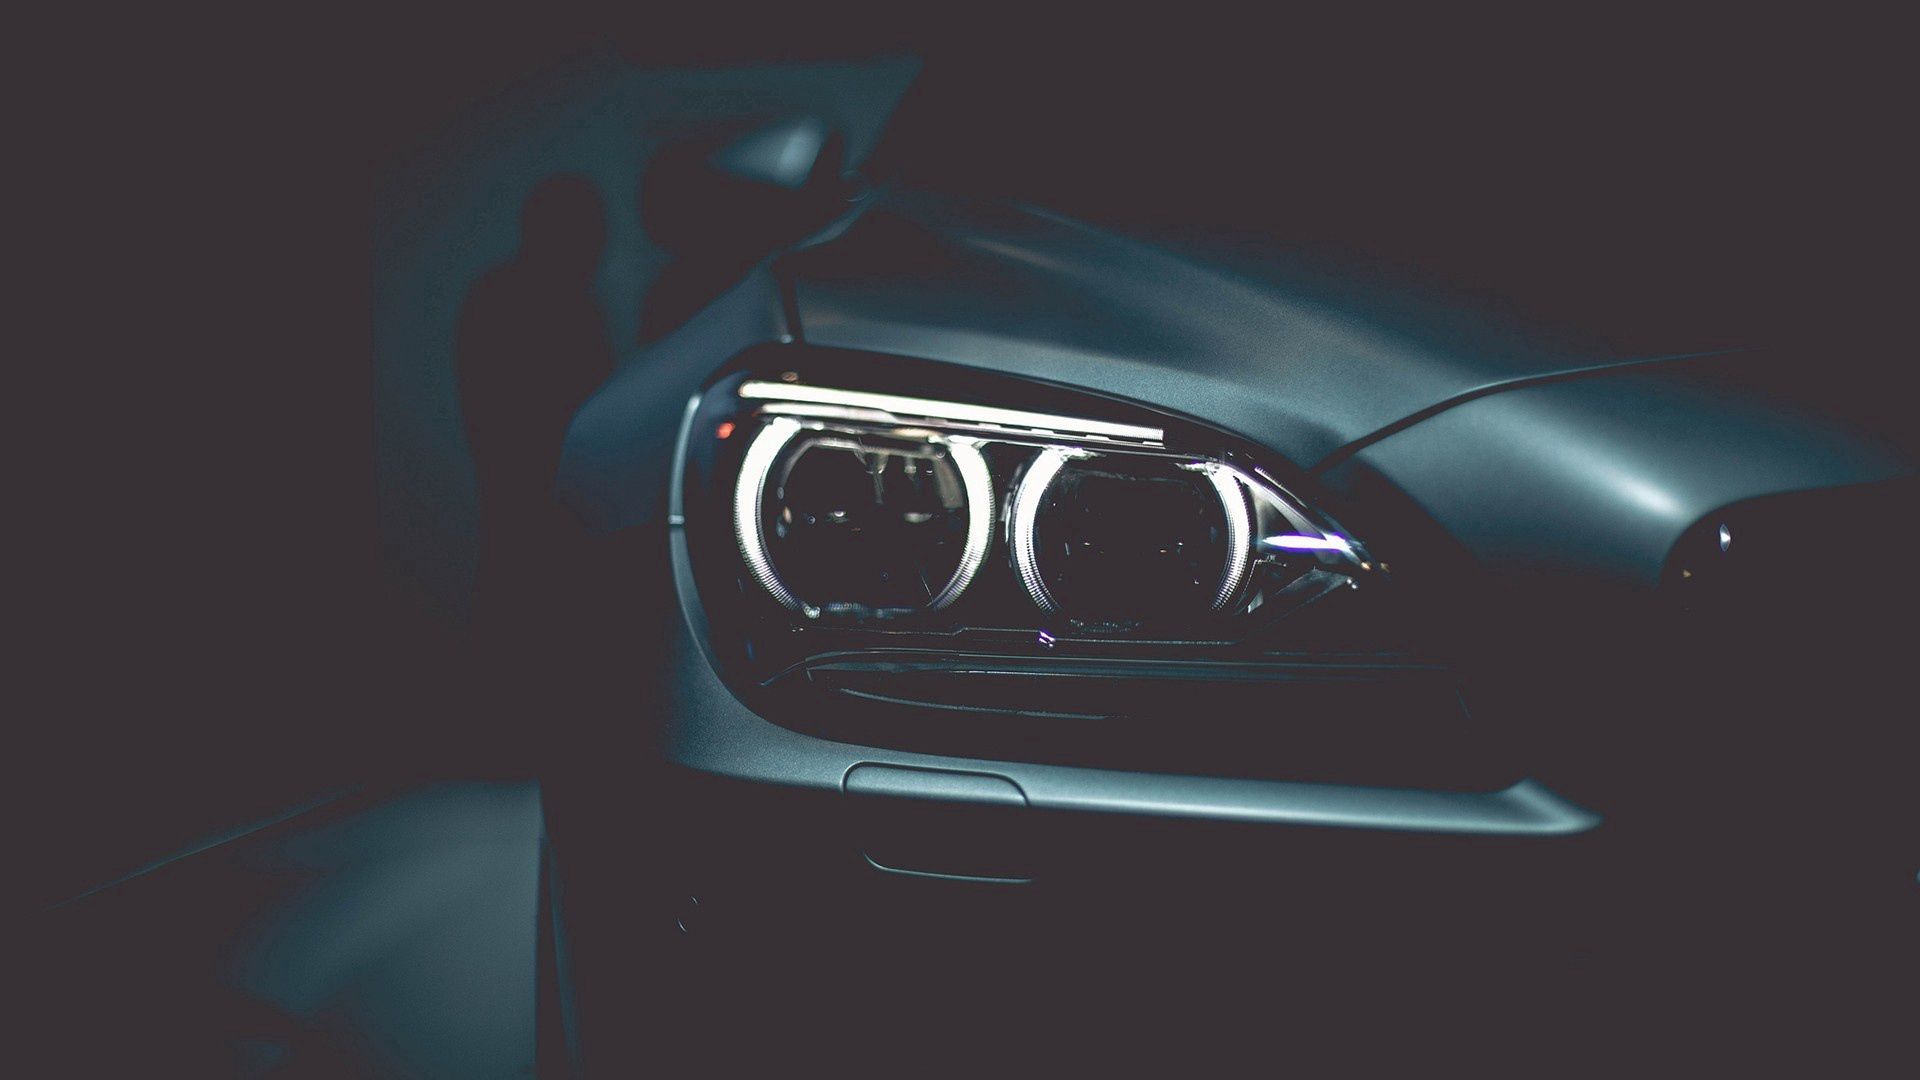 android bmw, cars, black, lights, style, headlights